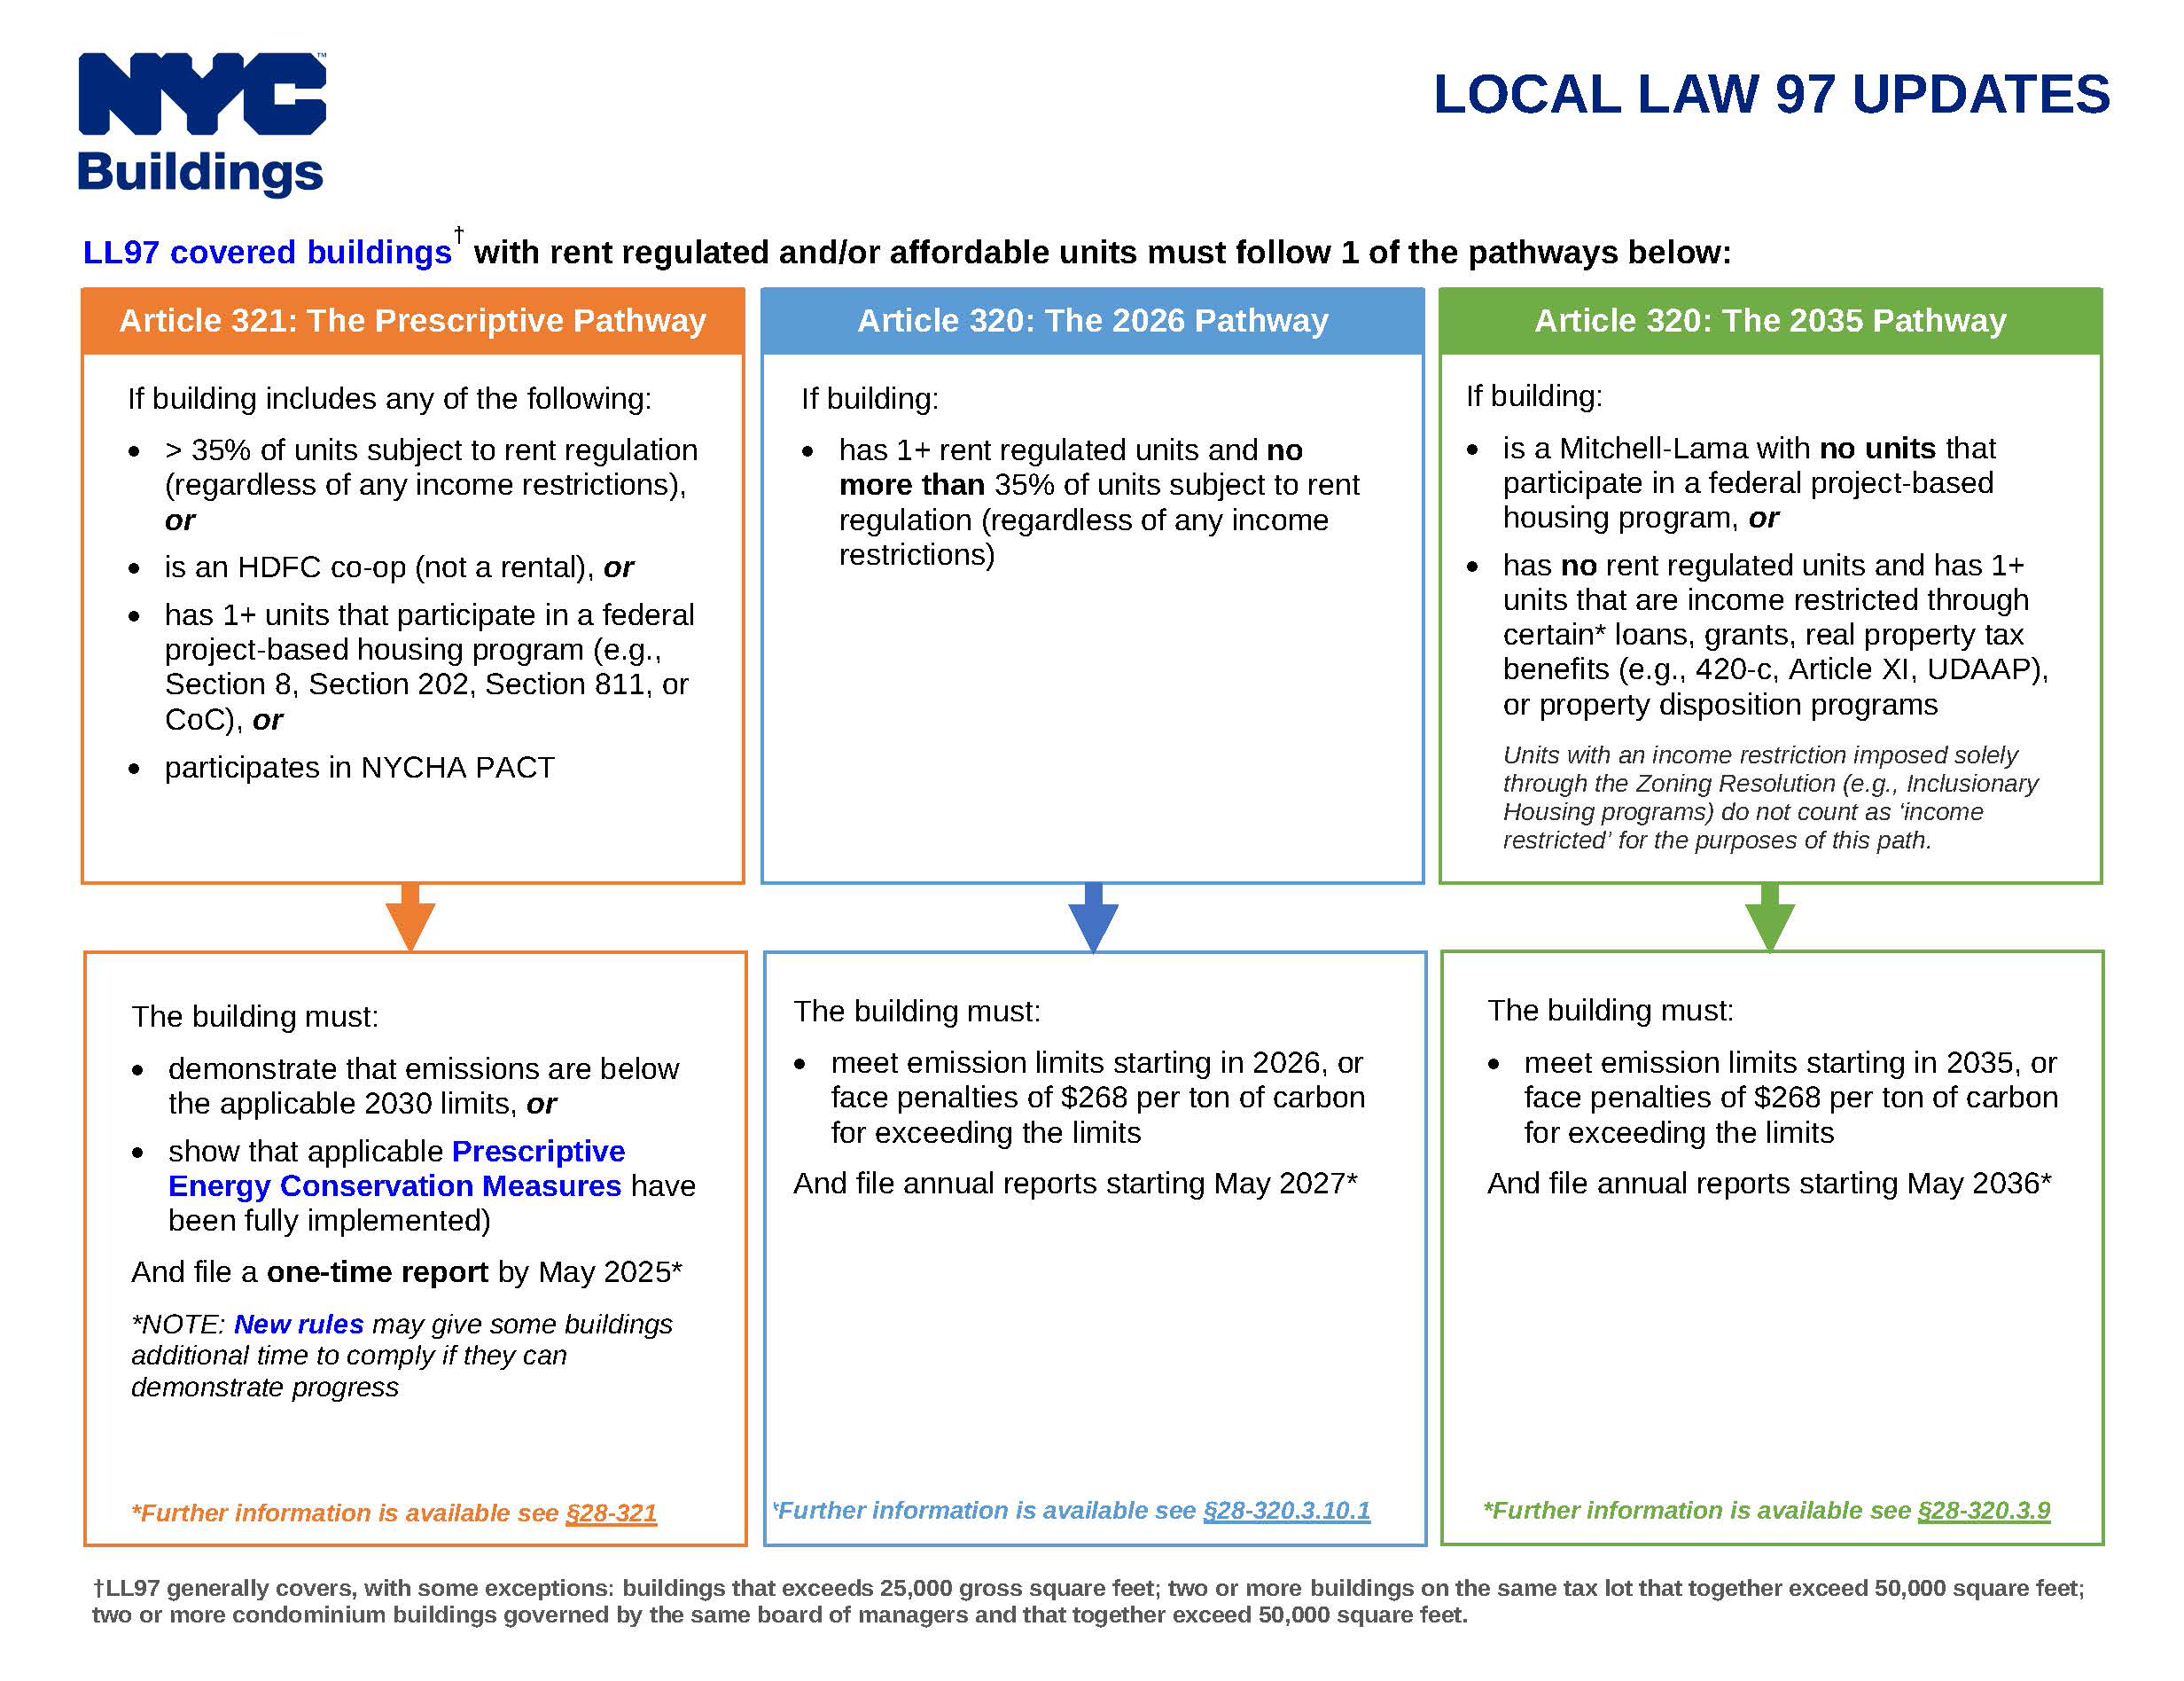 Local Law 97 Compliance Guidelines for Rent Regulated and Affordable Housing